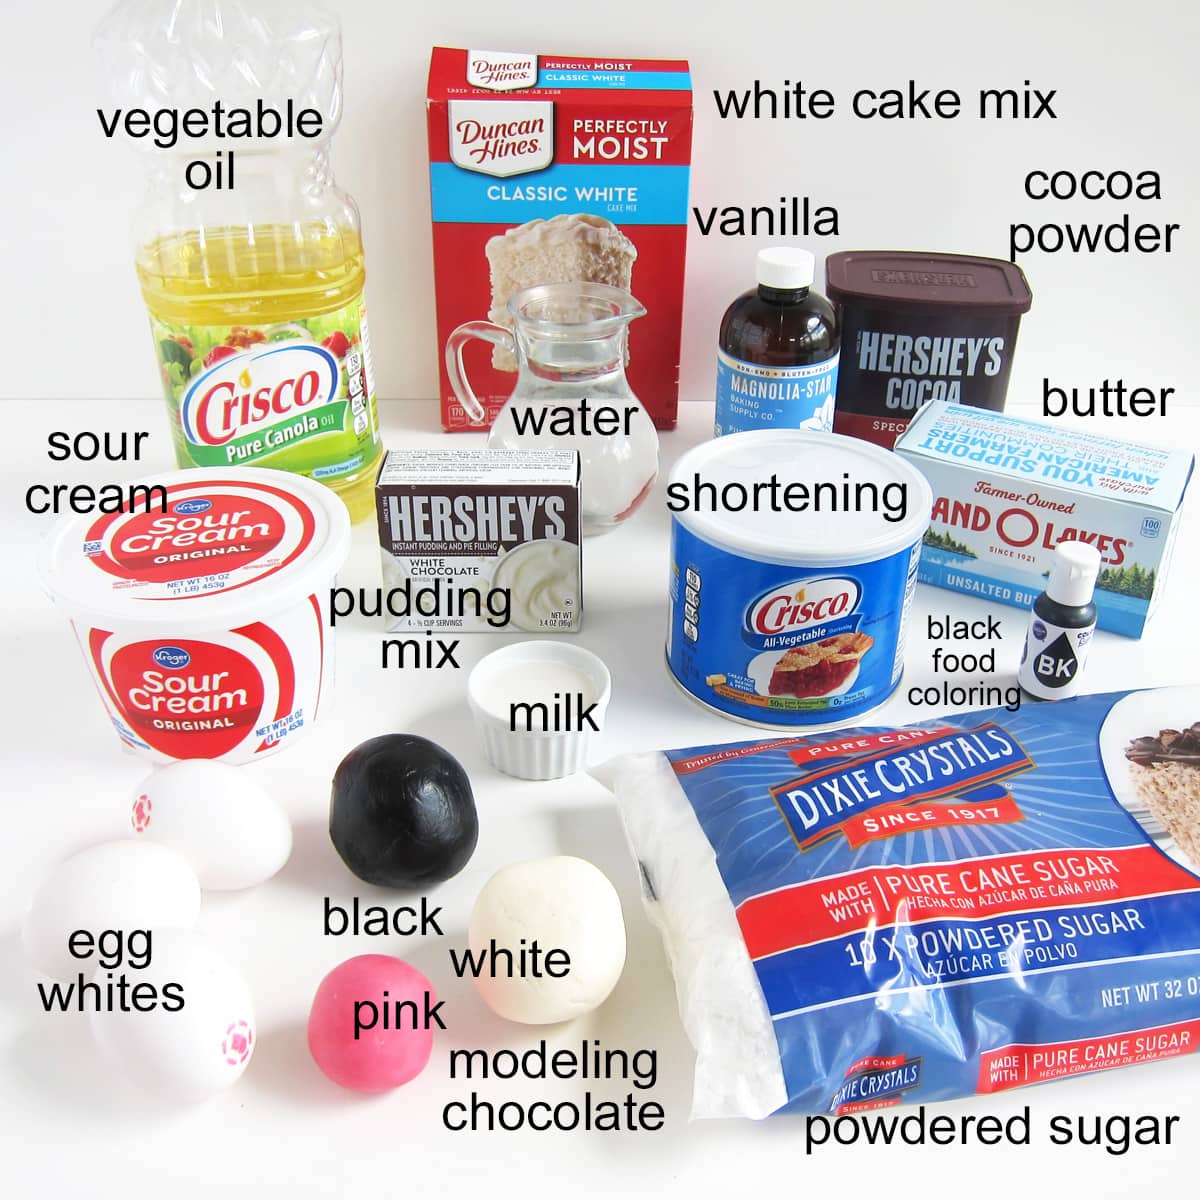 panda cake ingredients including white cake, oil, eggs, sour cream, pudding mix, powdered sugar, butter, shortening, vanilla, cocoa powder, milk, and modeling chocolate. 